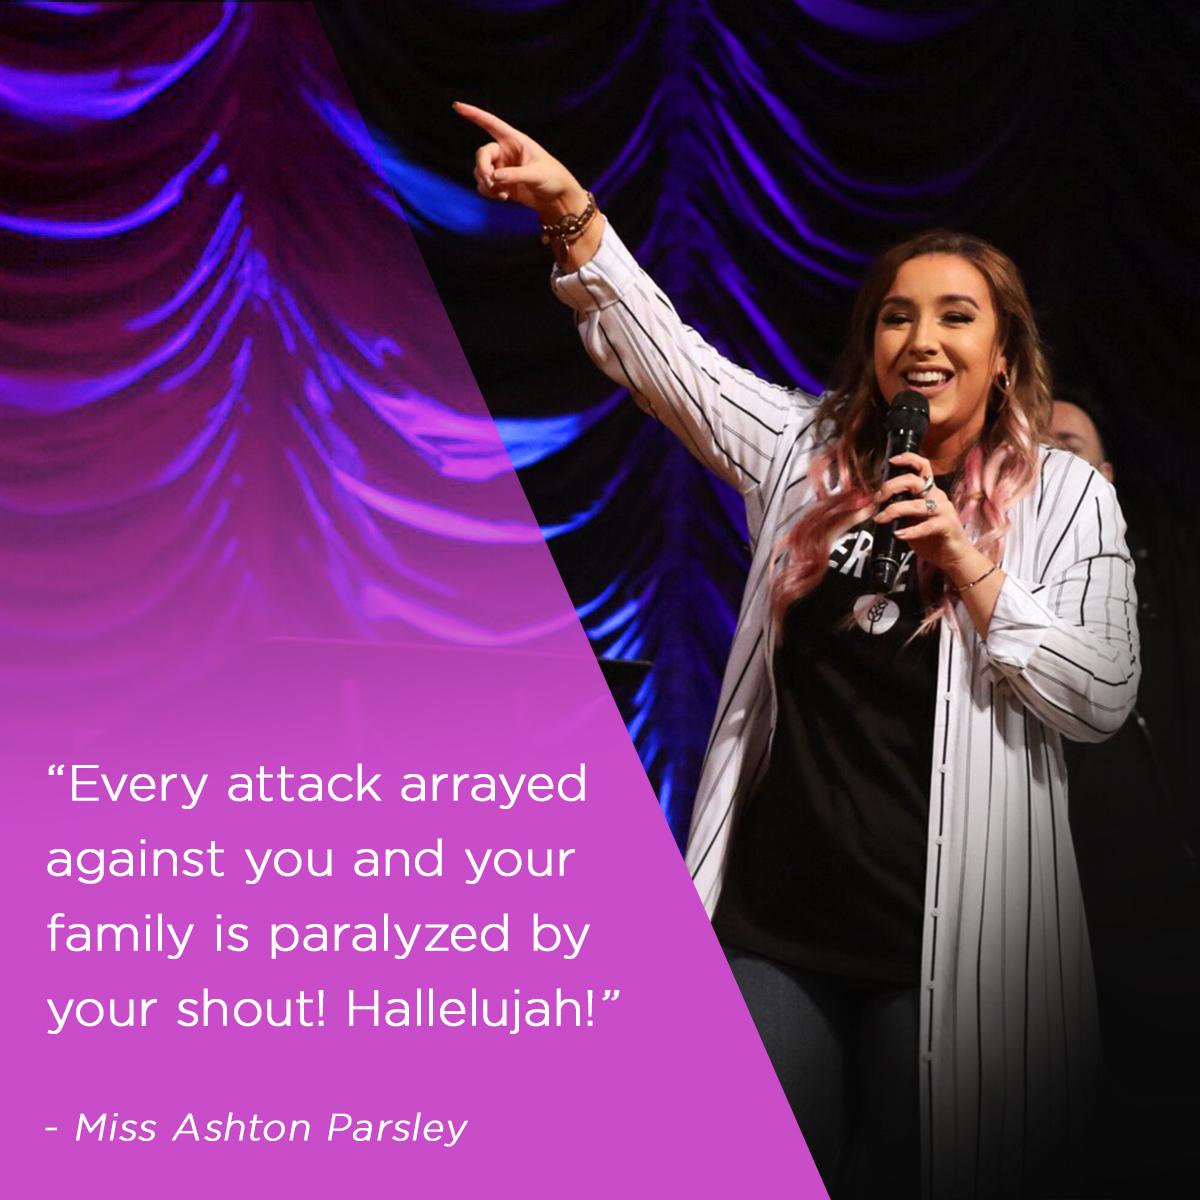 “Every attack arrayed against you and your family is paralyzed by your shout! Hallelujah!” – Miss Ashton Parsley